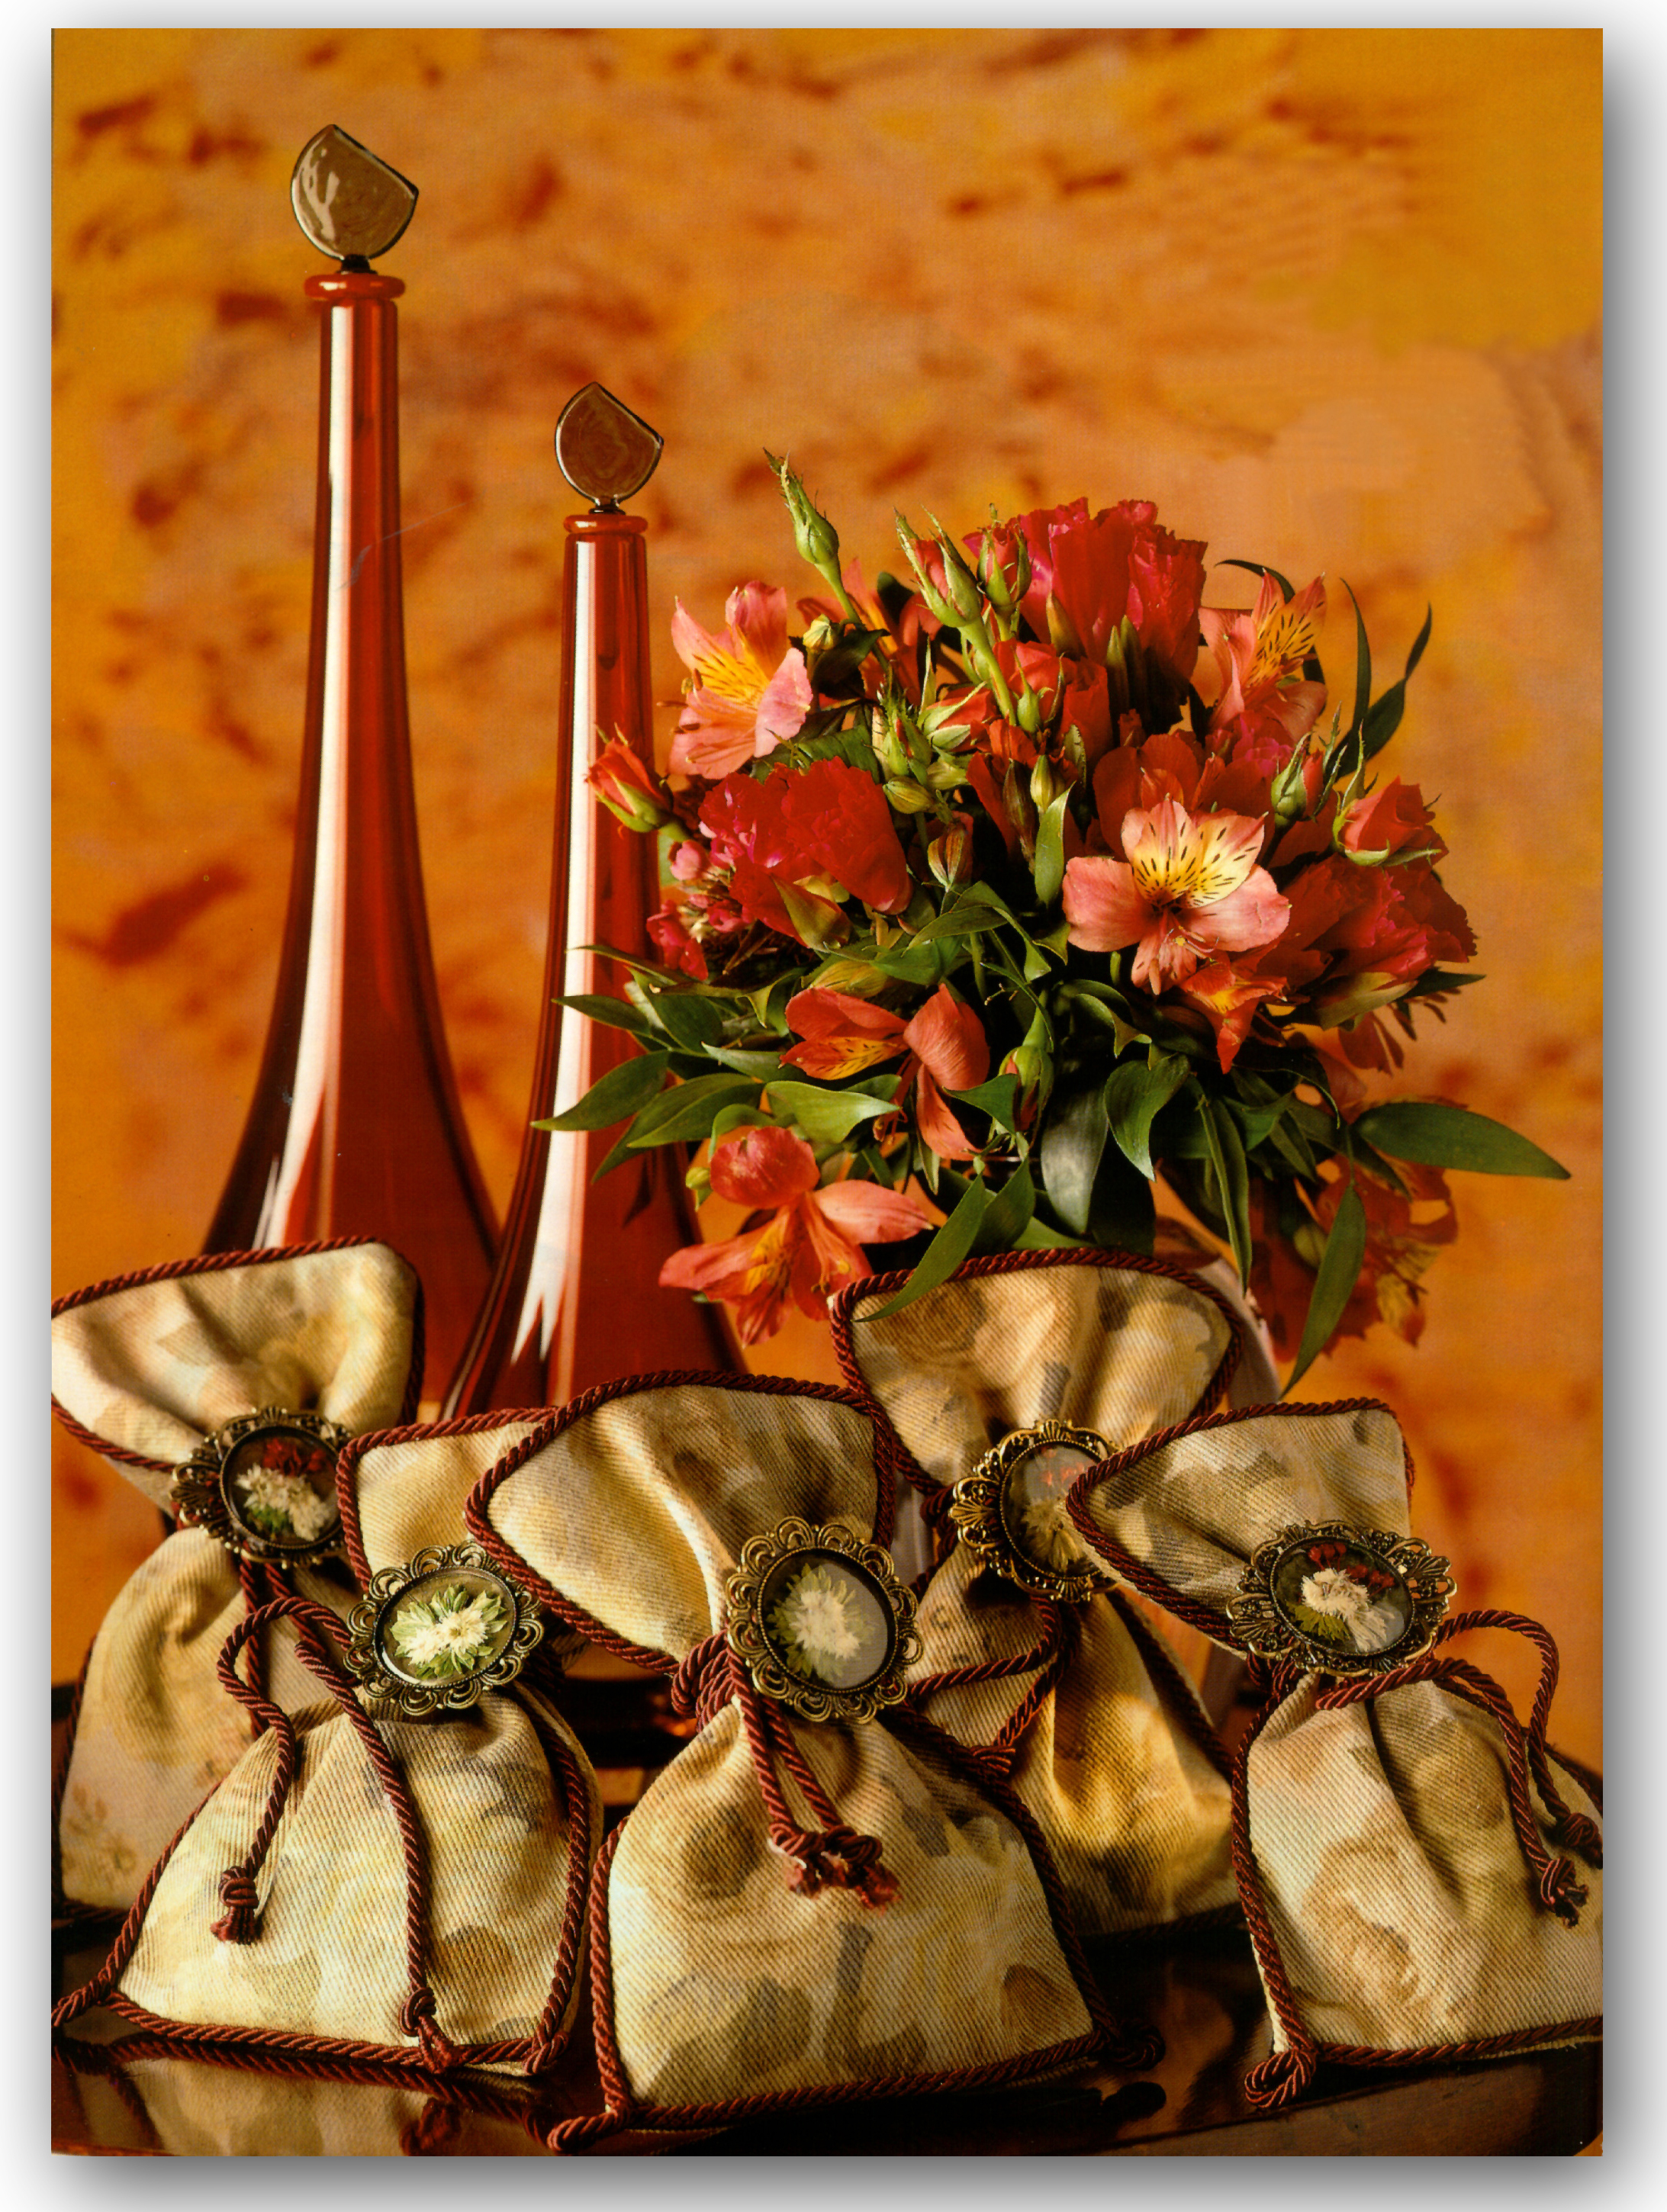 3D Lenticular Greeting Christmas Card with Custom Design, Red Wine Bottles, Flowers, and Bags, Depth